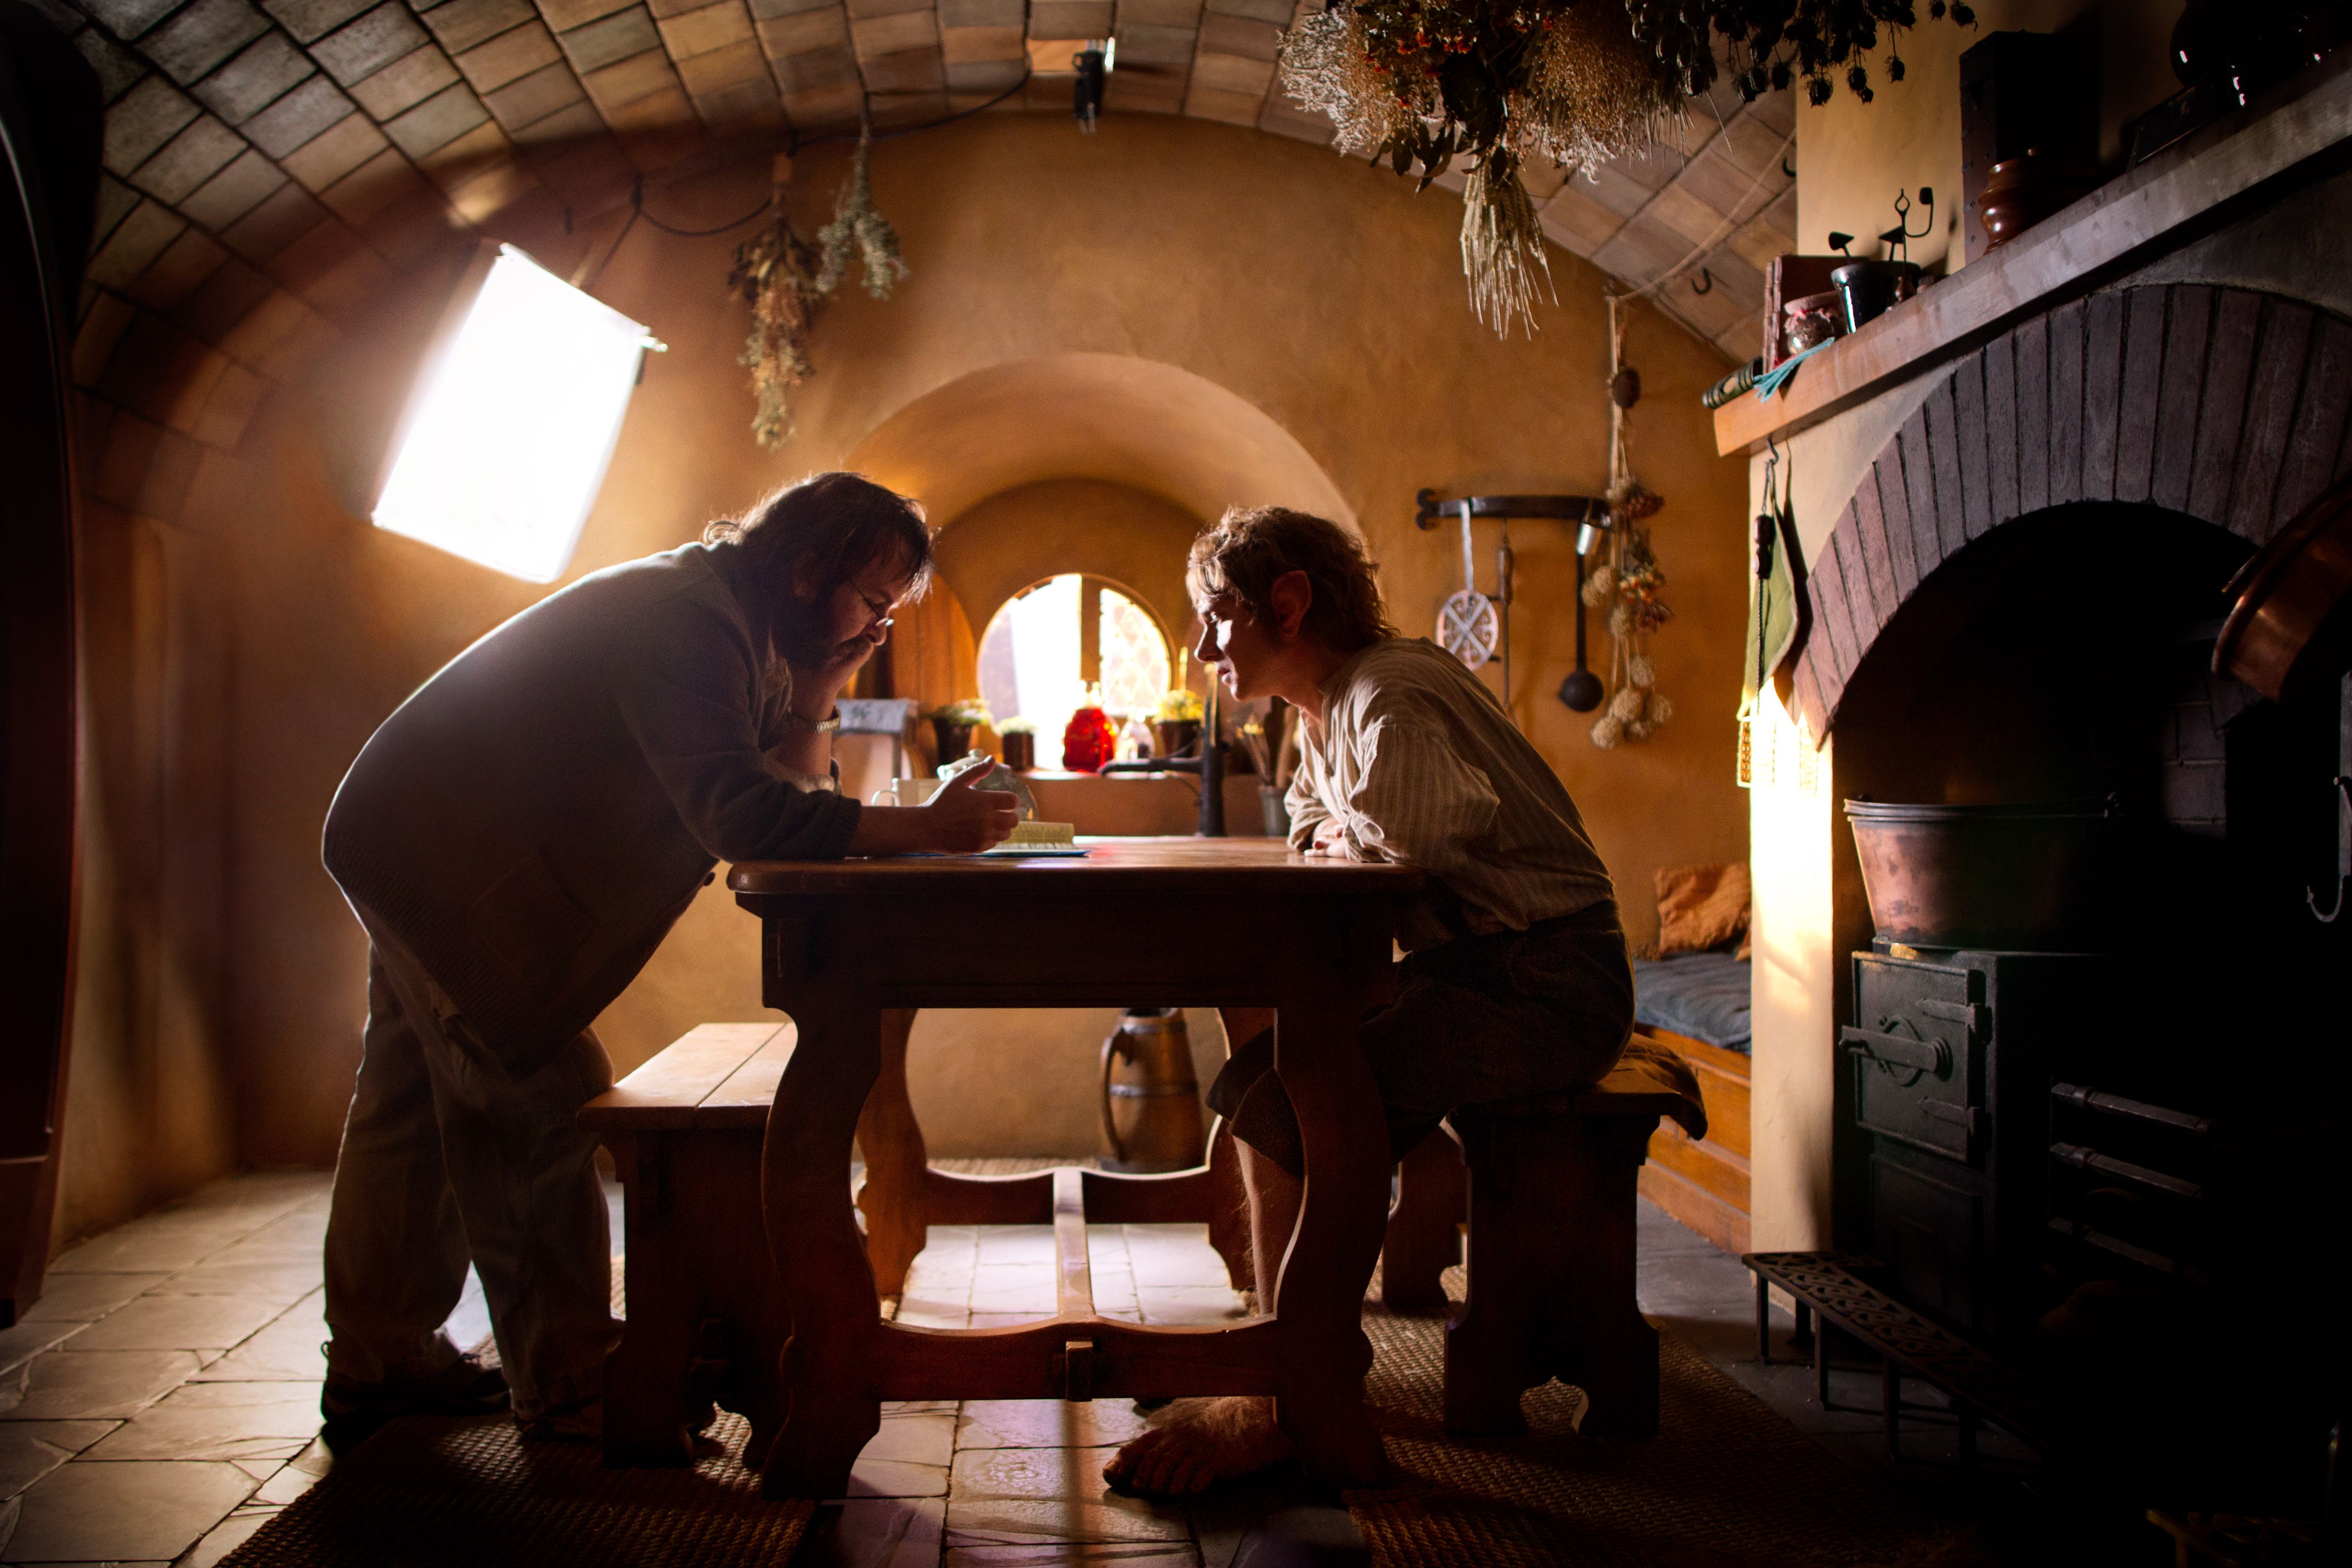 Peter Jackson with Martin Freeman on the set of The Hobbit